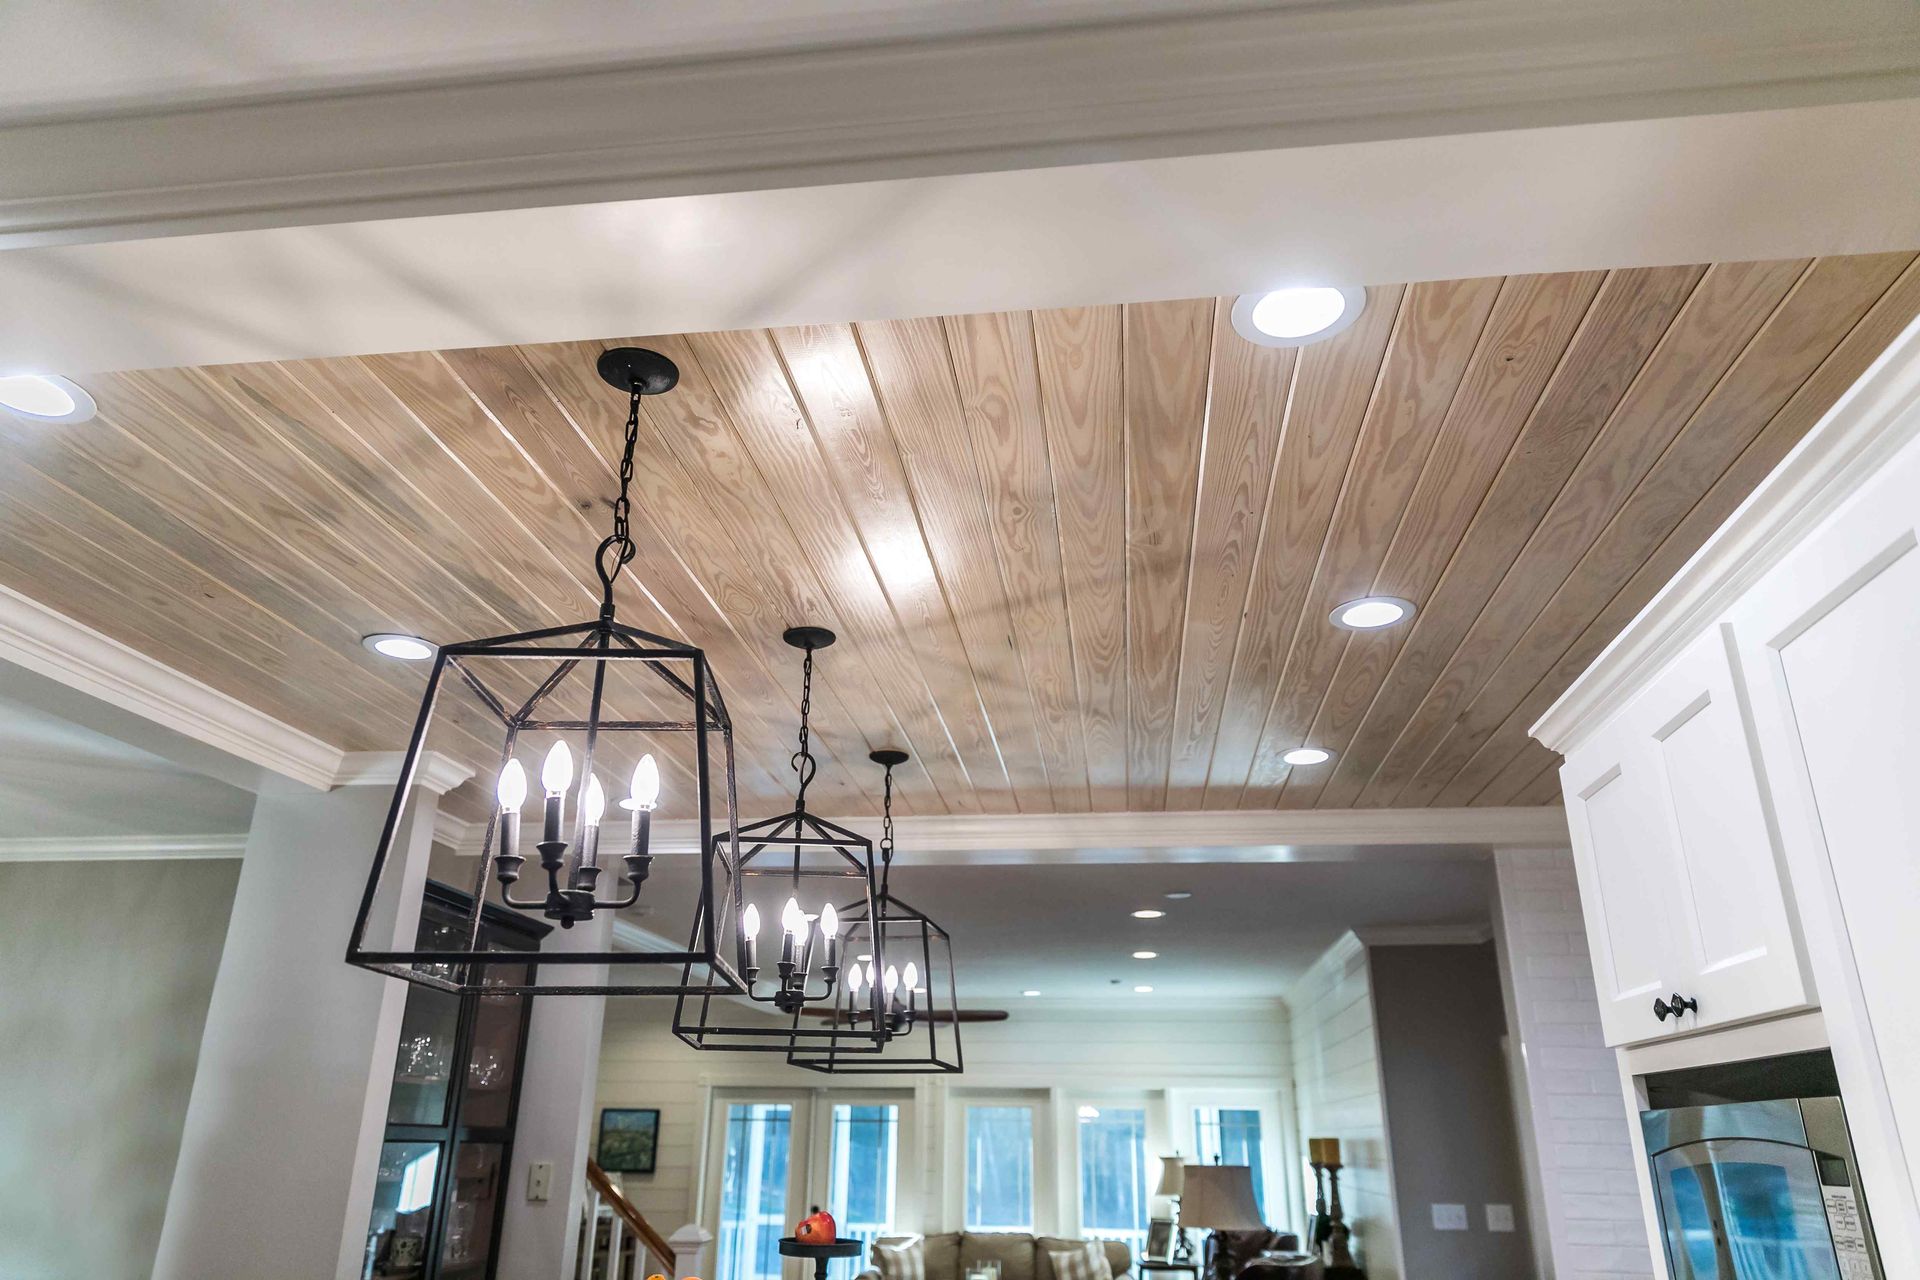 shot of a beautiful ceiling in a home with recessed lighting and light fixtures